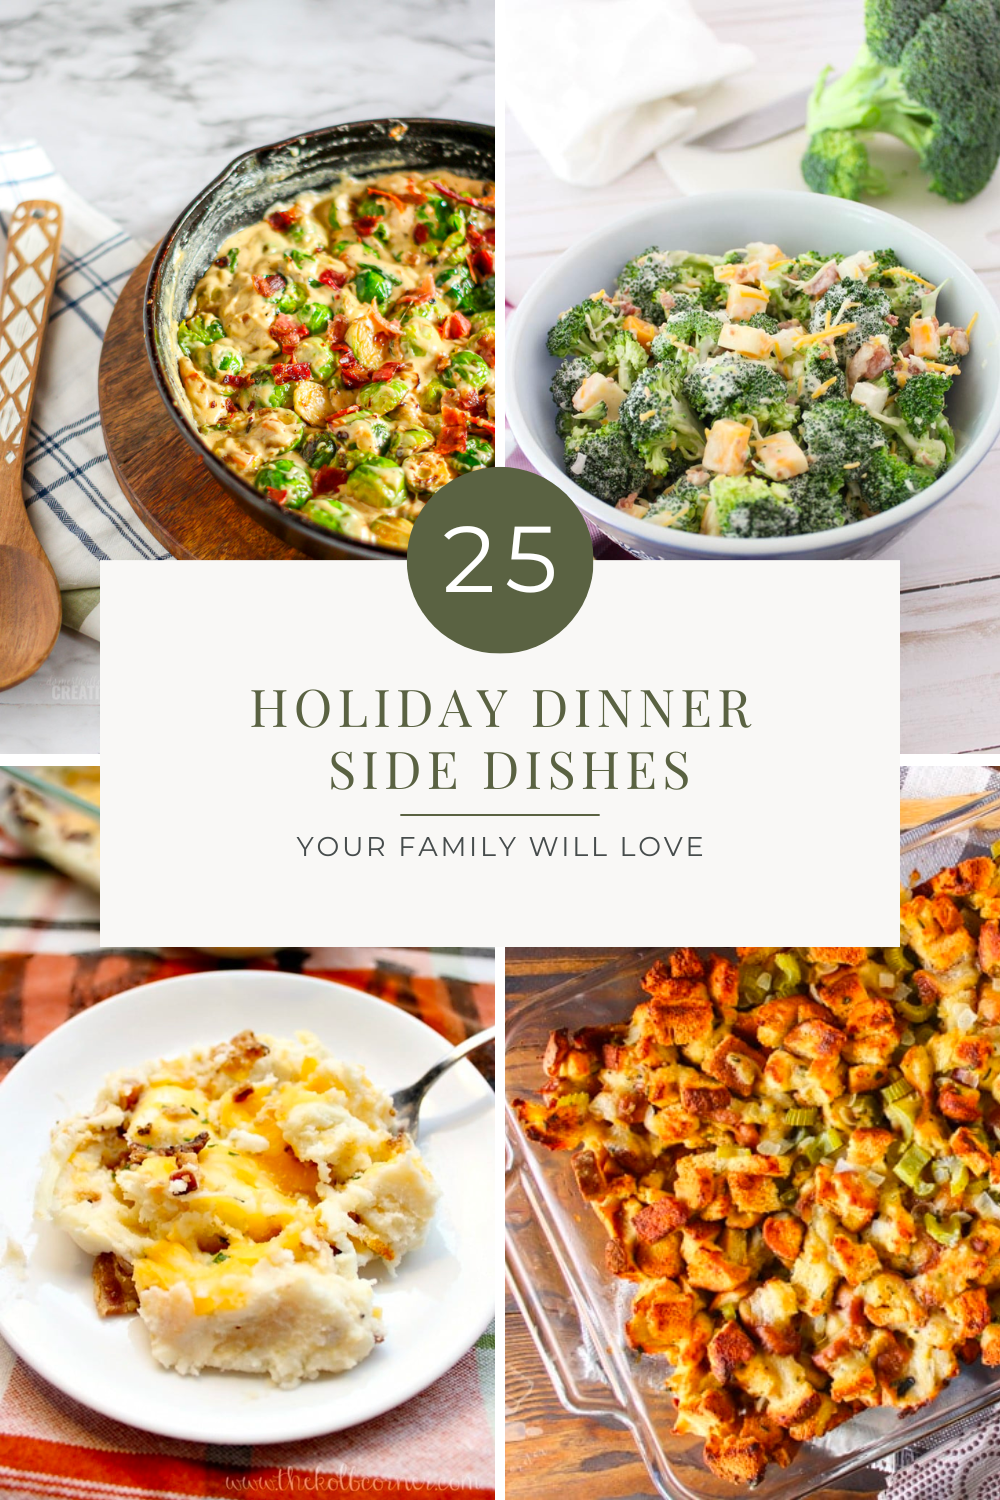 Holiday Dinner Side Dishes